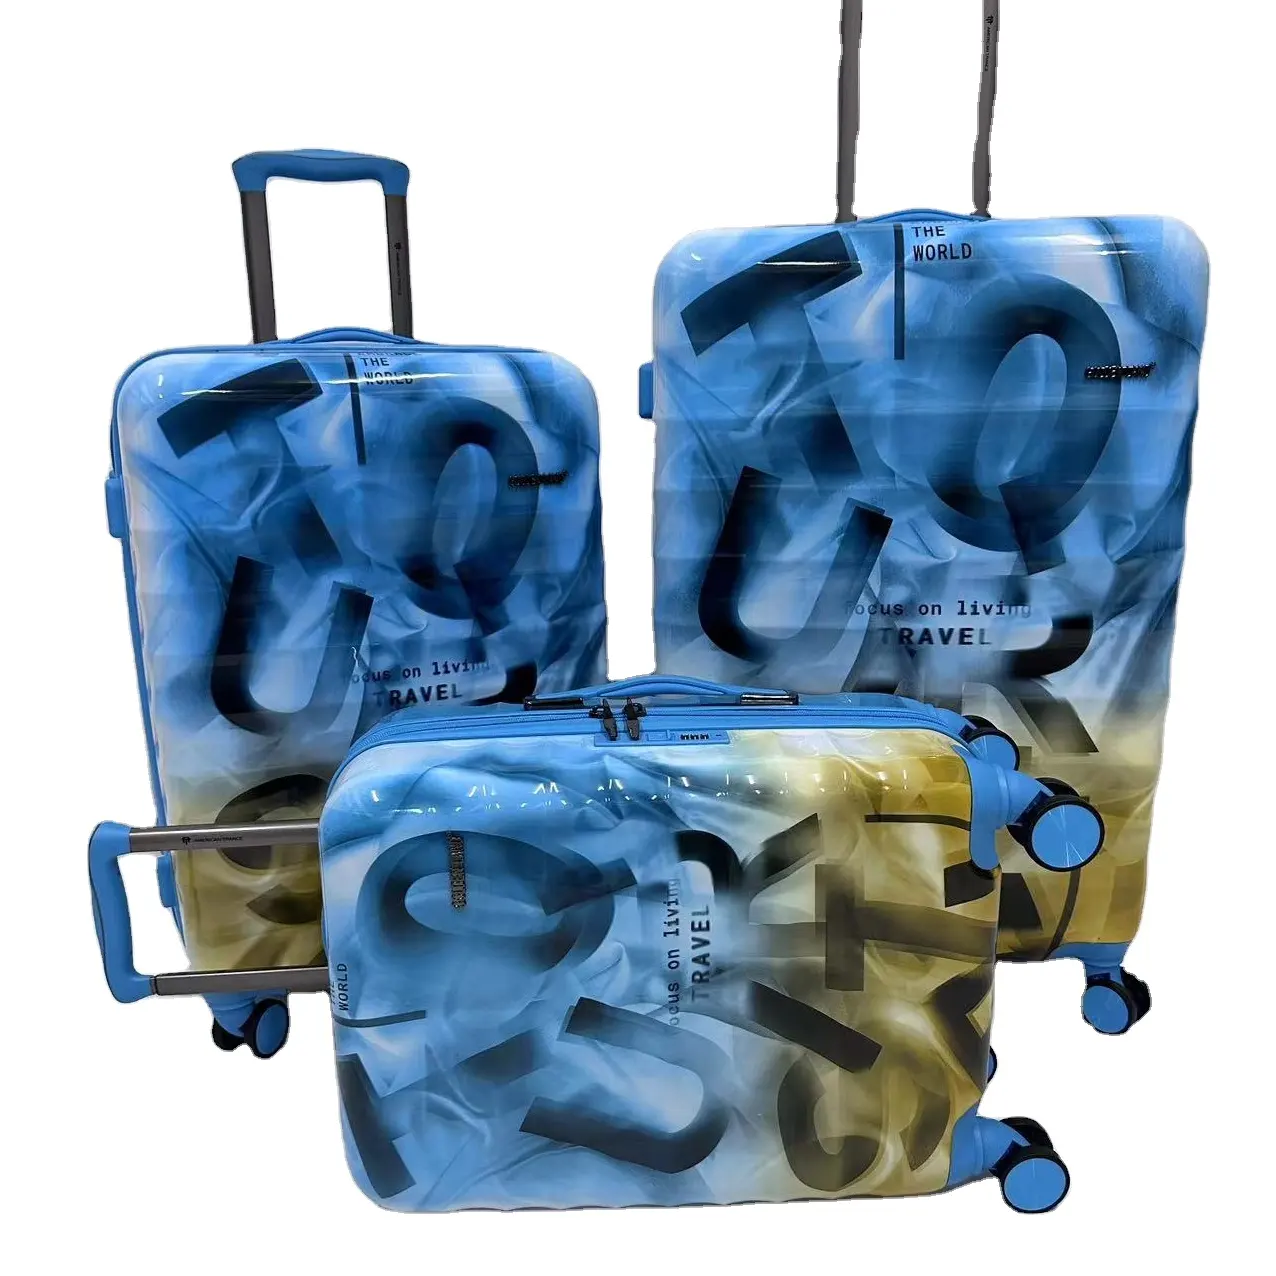 New carry-on pc travel bags luggage for lady Material Luggage 3 pcs Trolley Suitcase valise de voyage 3 pcs sets